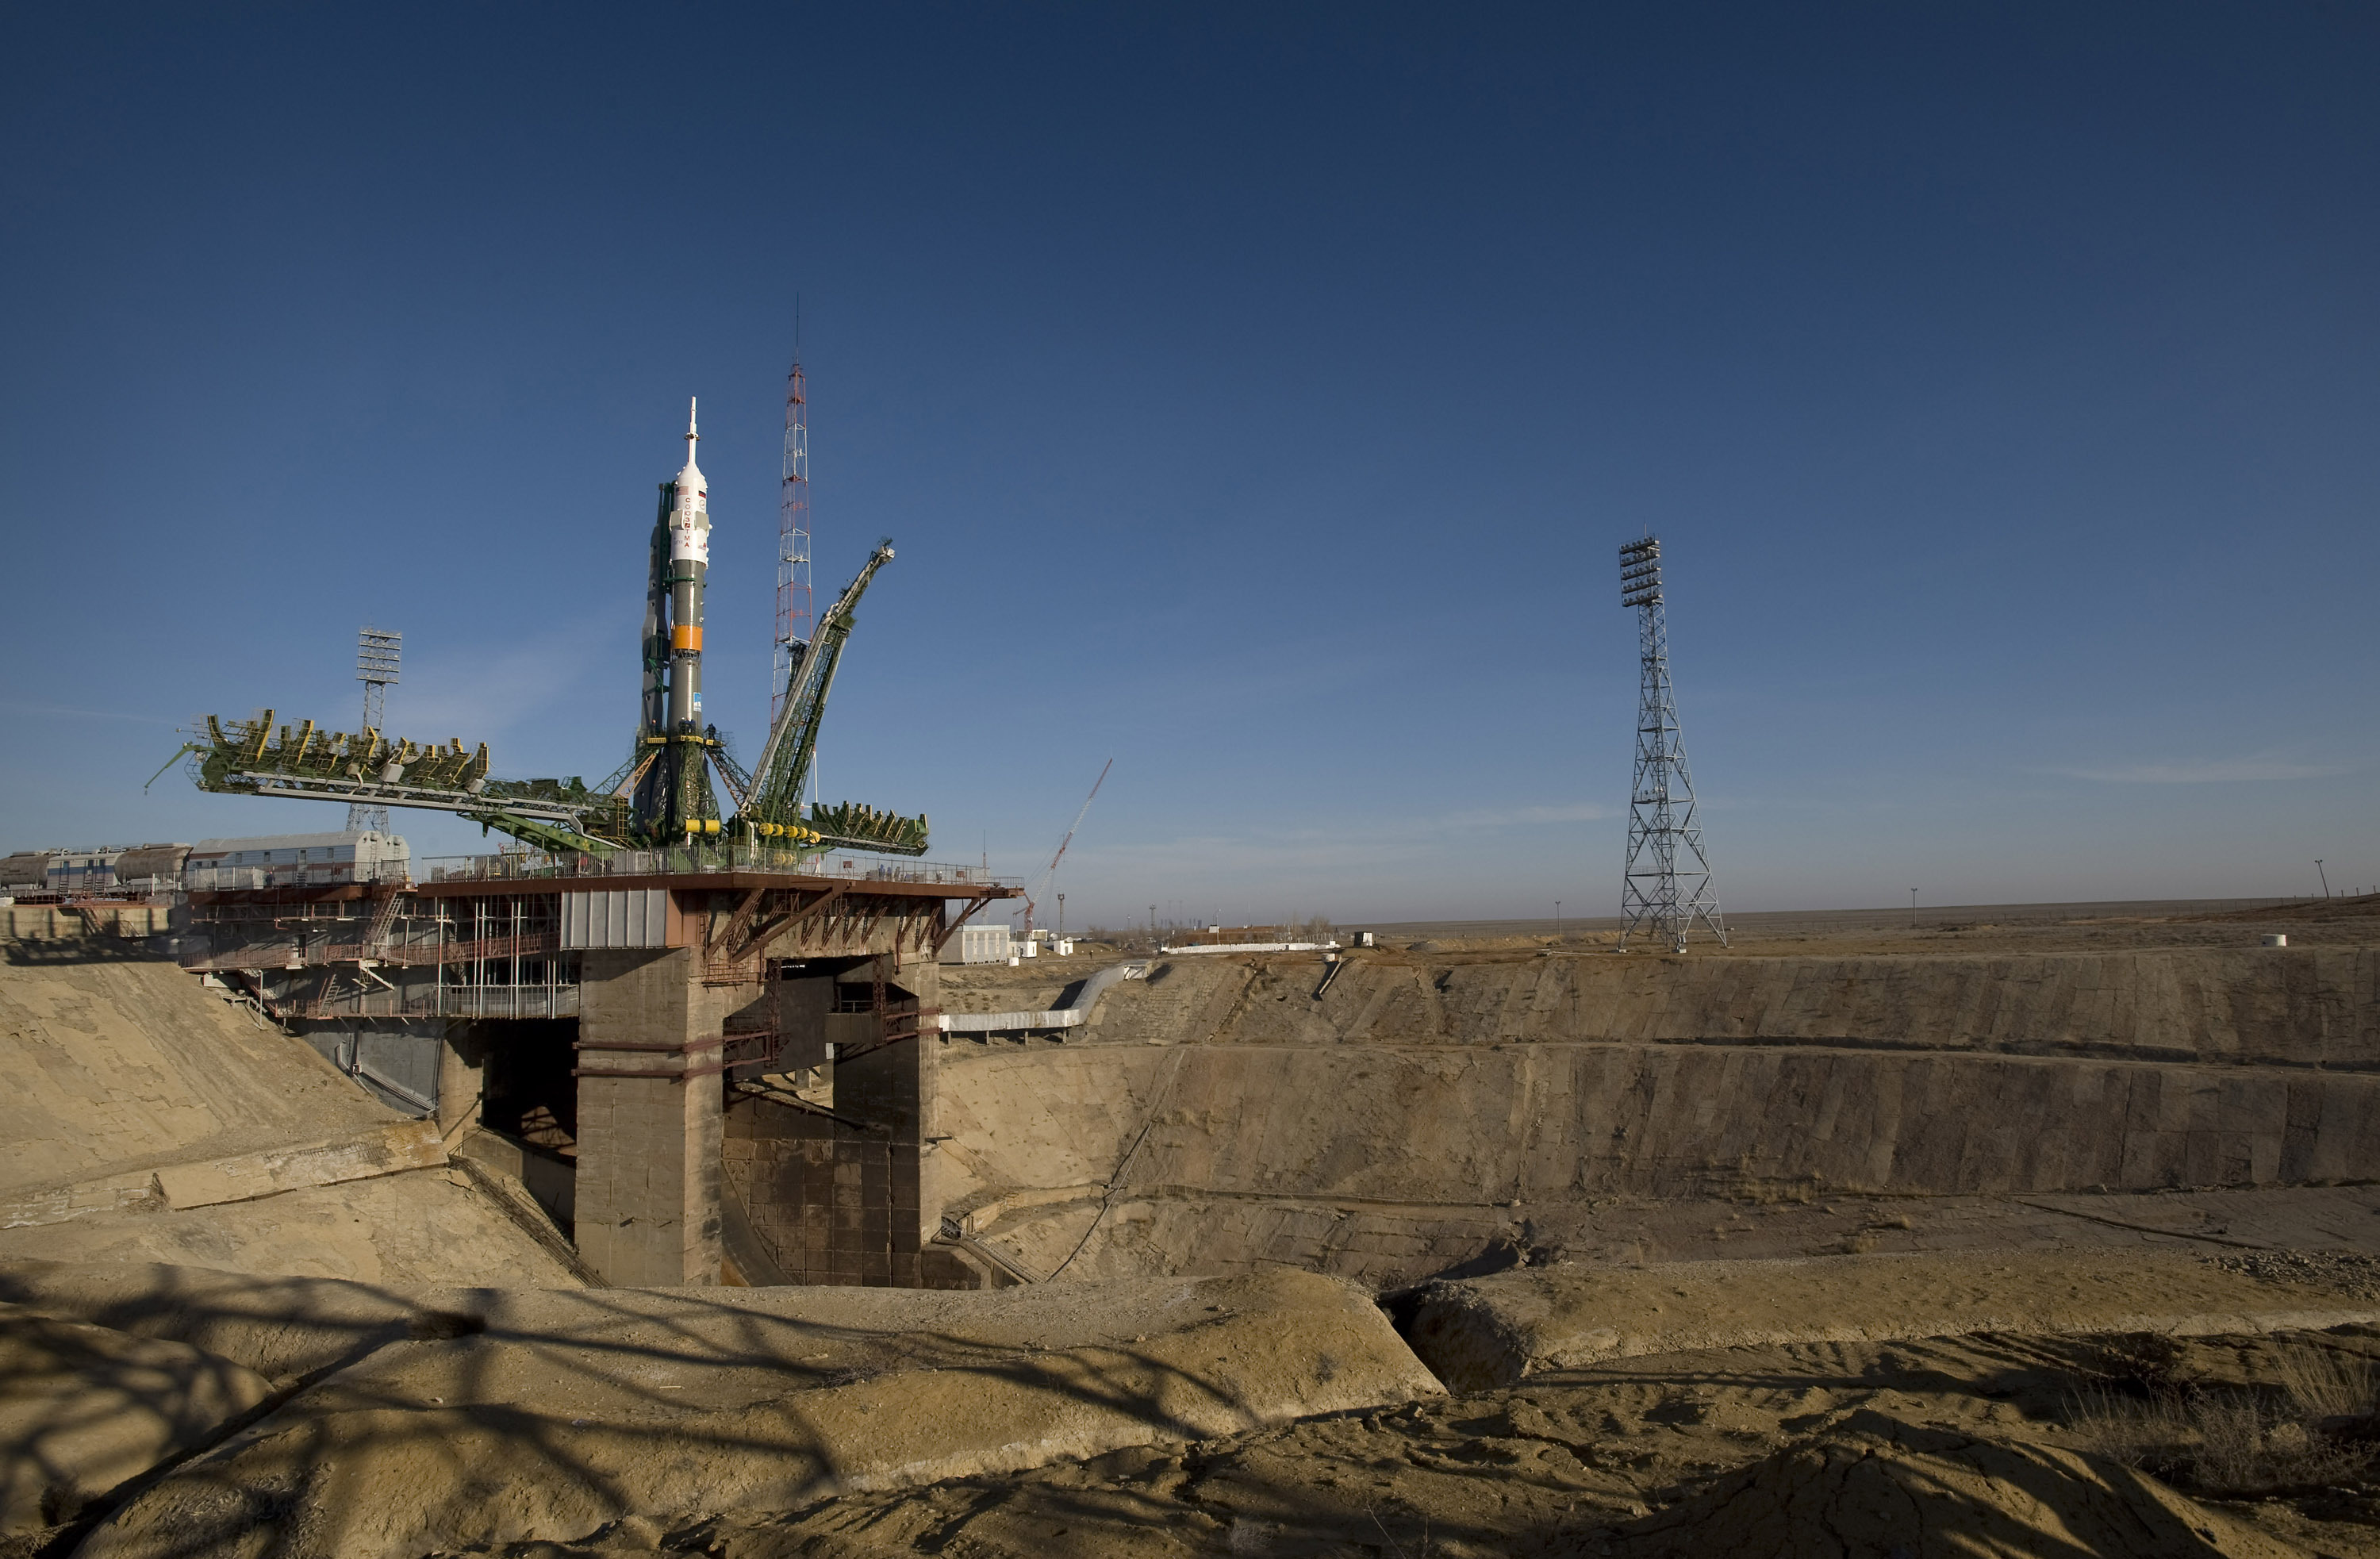 Soyuz expedition 19 launch pad